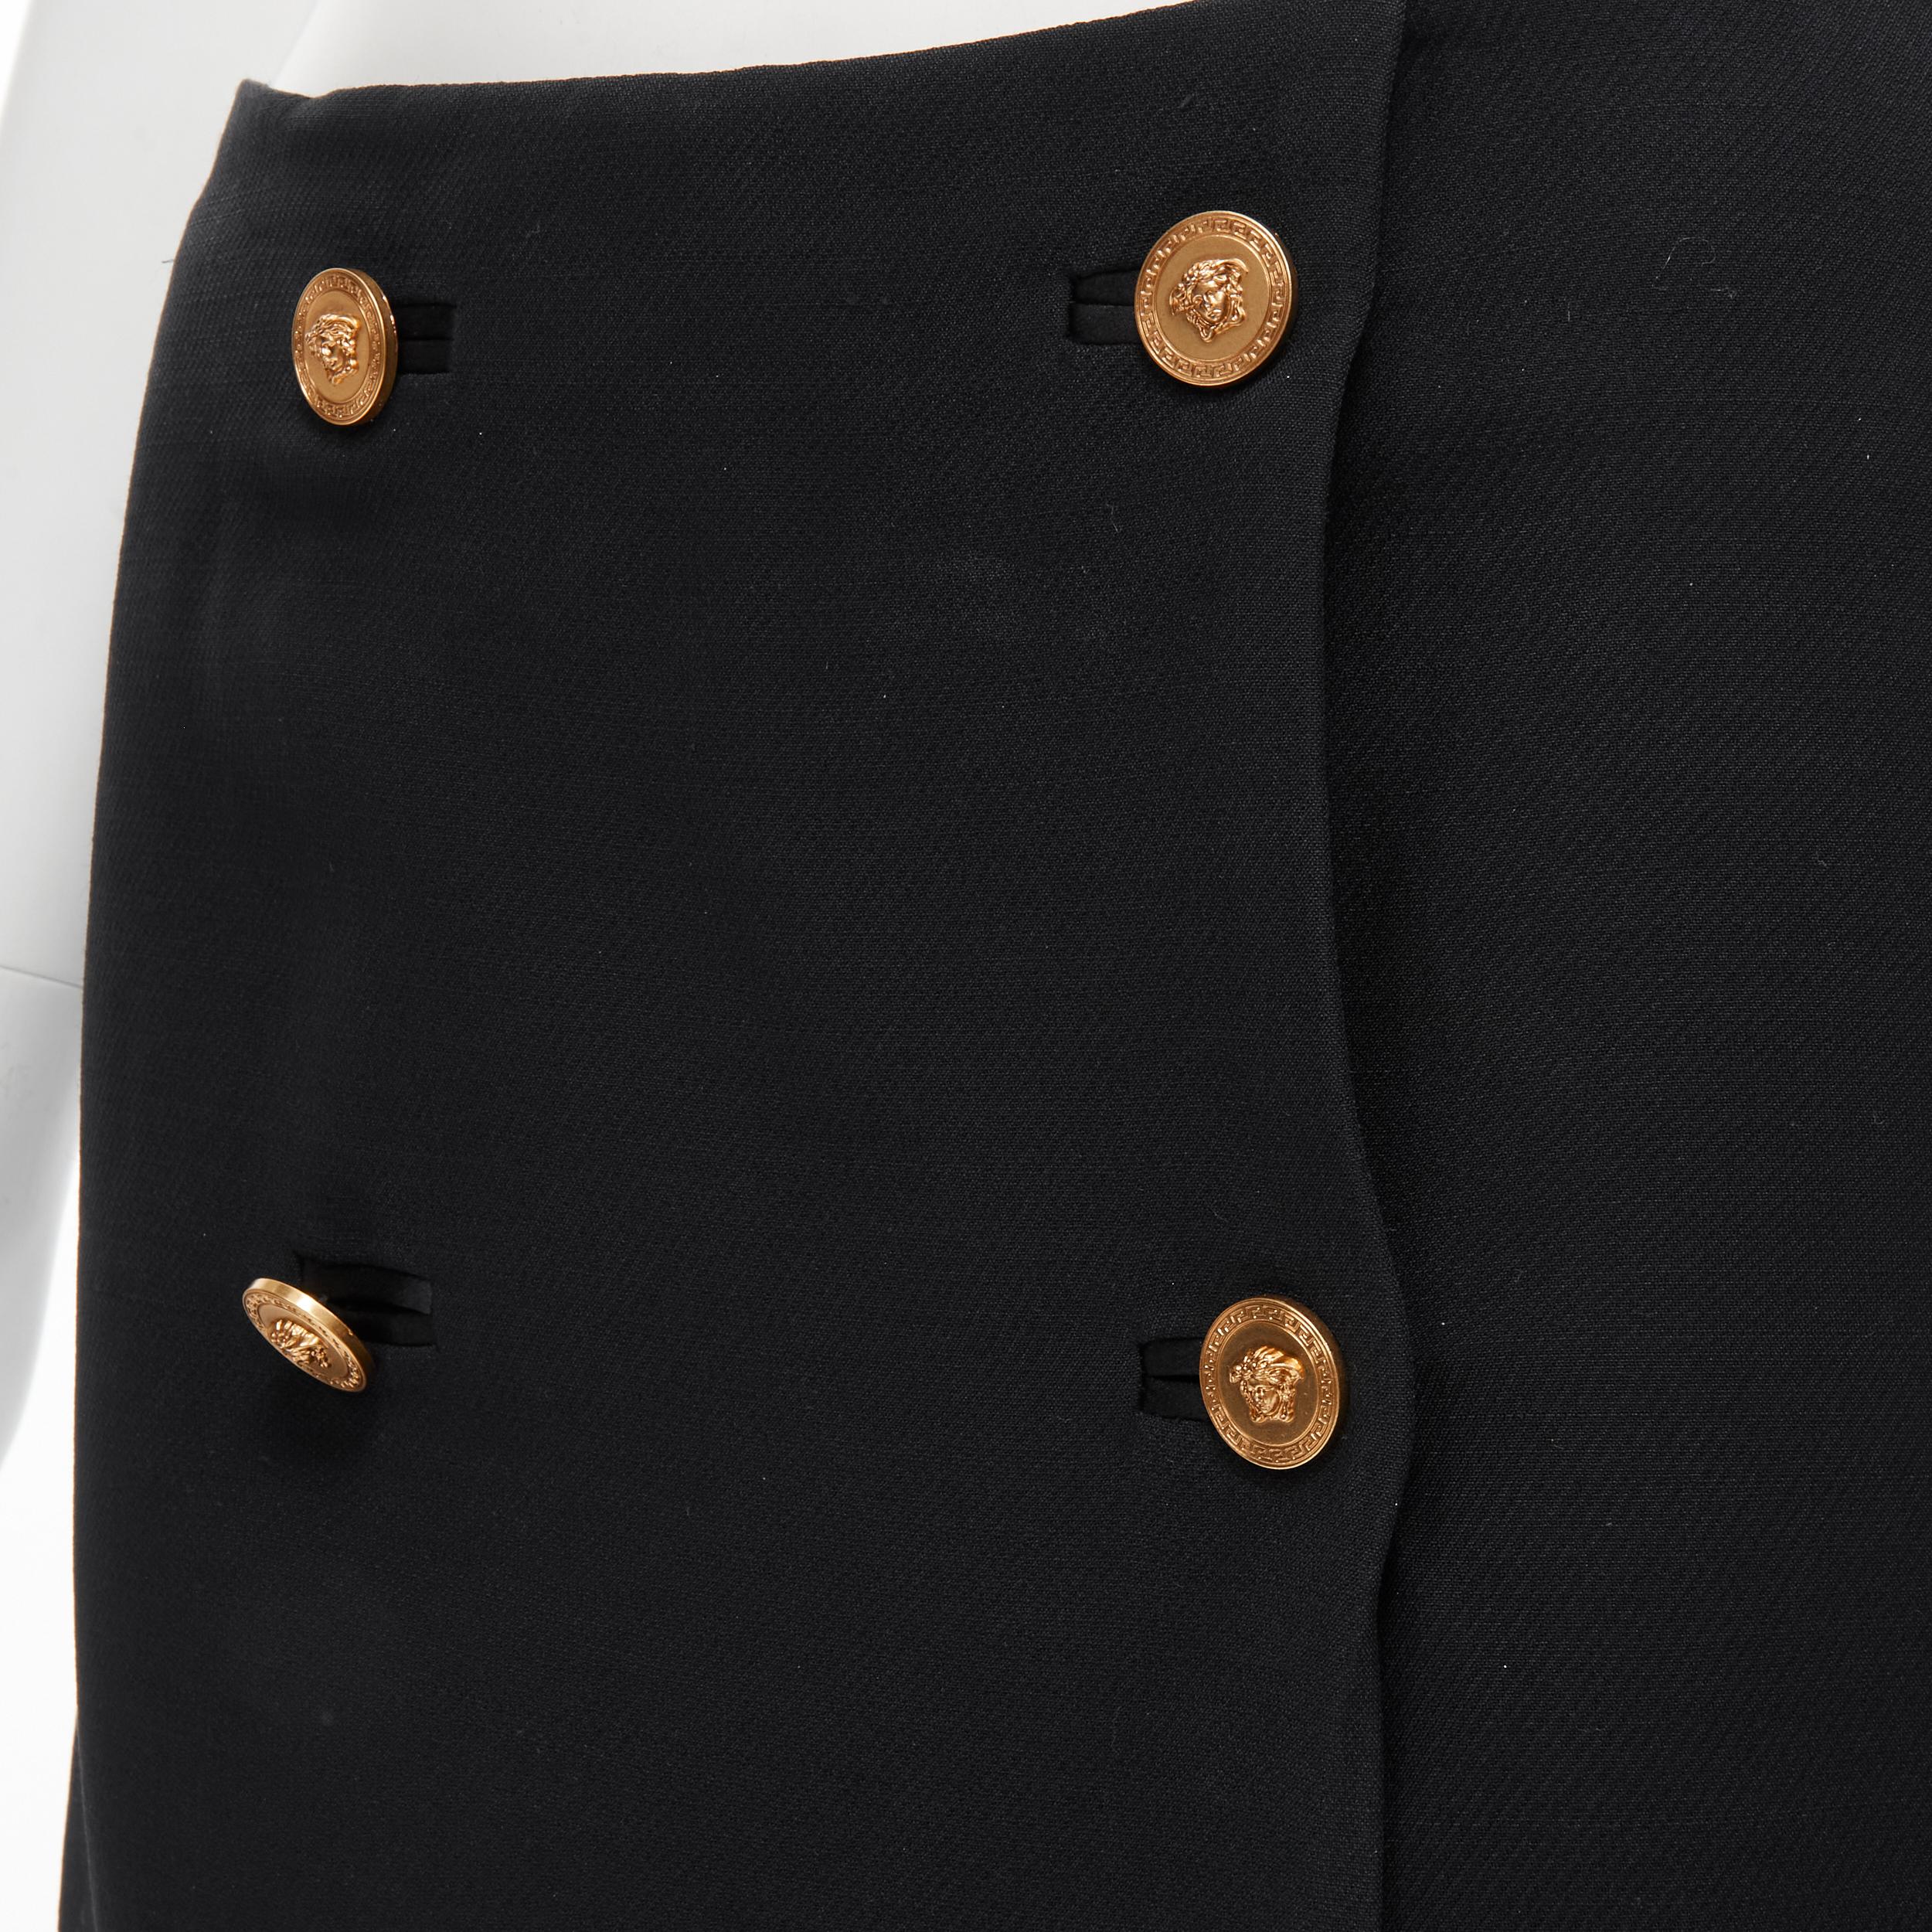 VERSACE black wool crepe gold Medusa button double breasted mini skirt IT38 XS Reference: TGAS/B01719 
Brand: Versace 
Designer: Donatella Versace 
Material: Wool 
Color: Black 
Pattern: Solid 
Closure: Button 
Made in: Italy 

CONDITION: